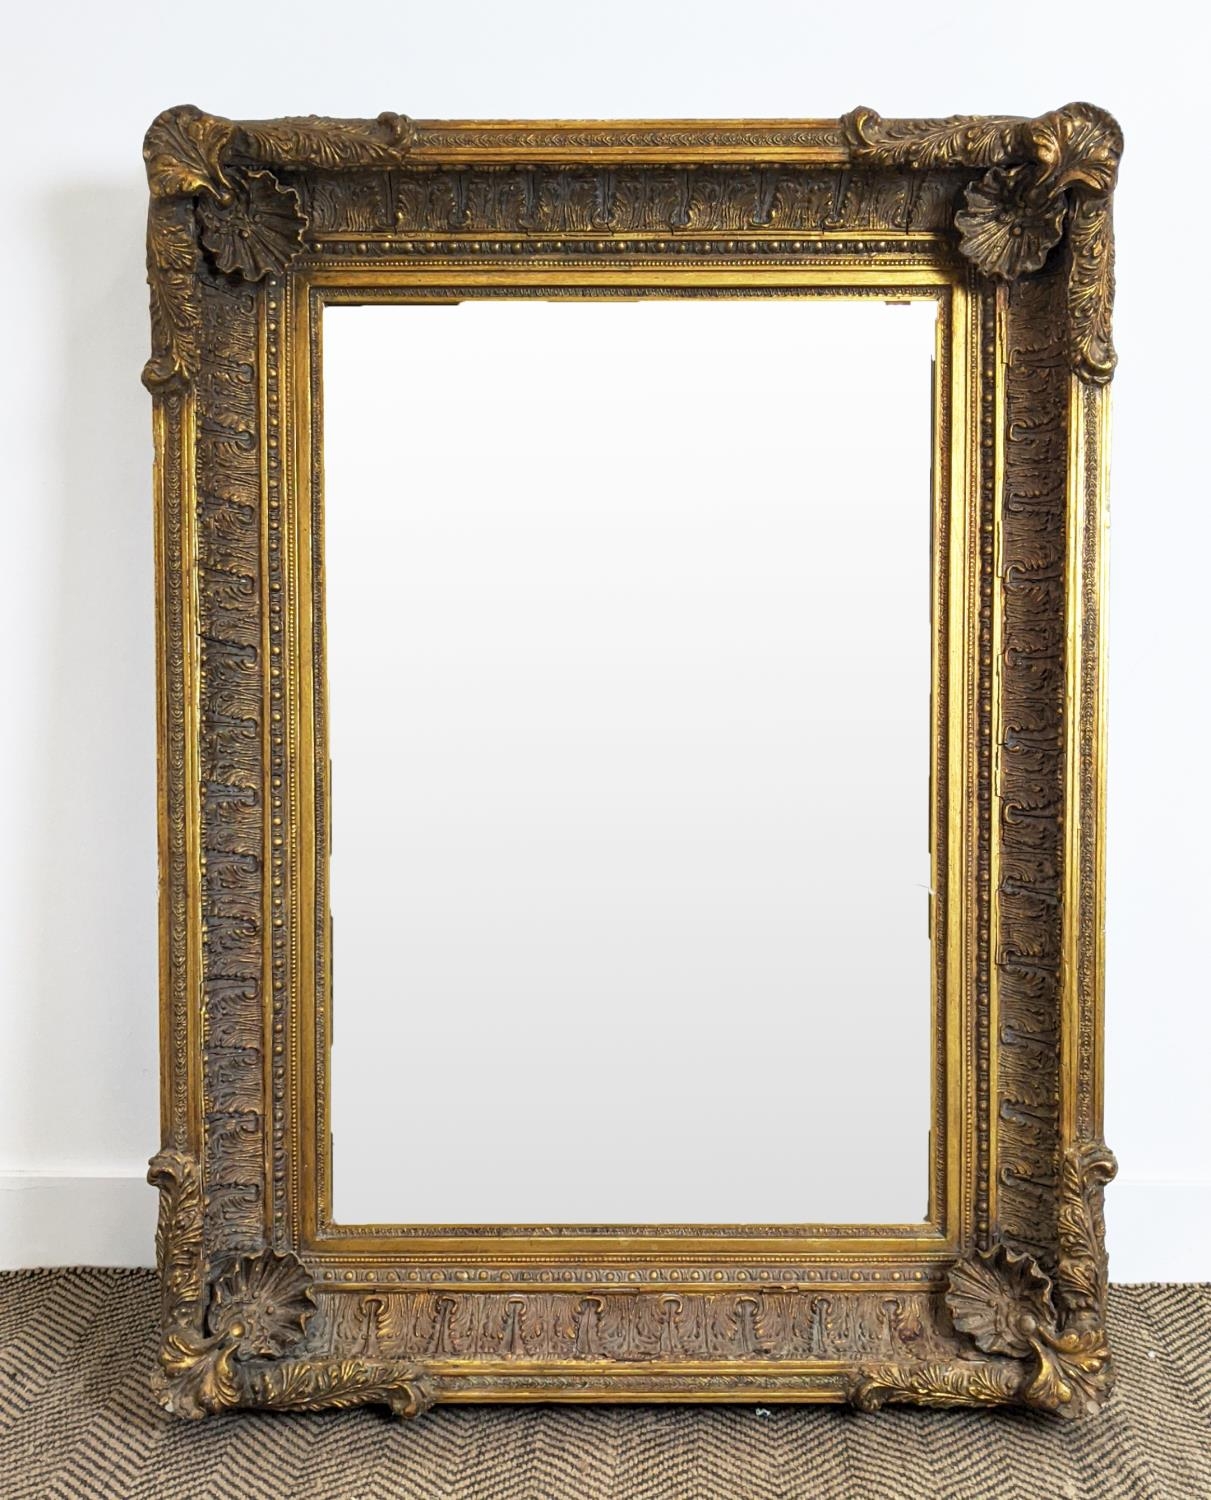 WALL MIRROR, 19th century style gilt framed with shell and leaf decoration, 121cm x 88cm. - Image 3 of 16